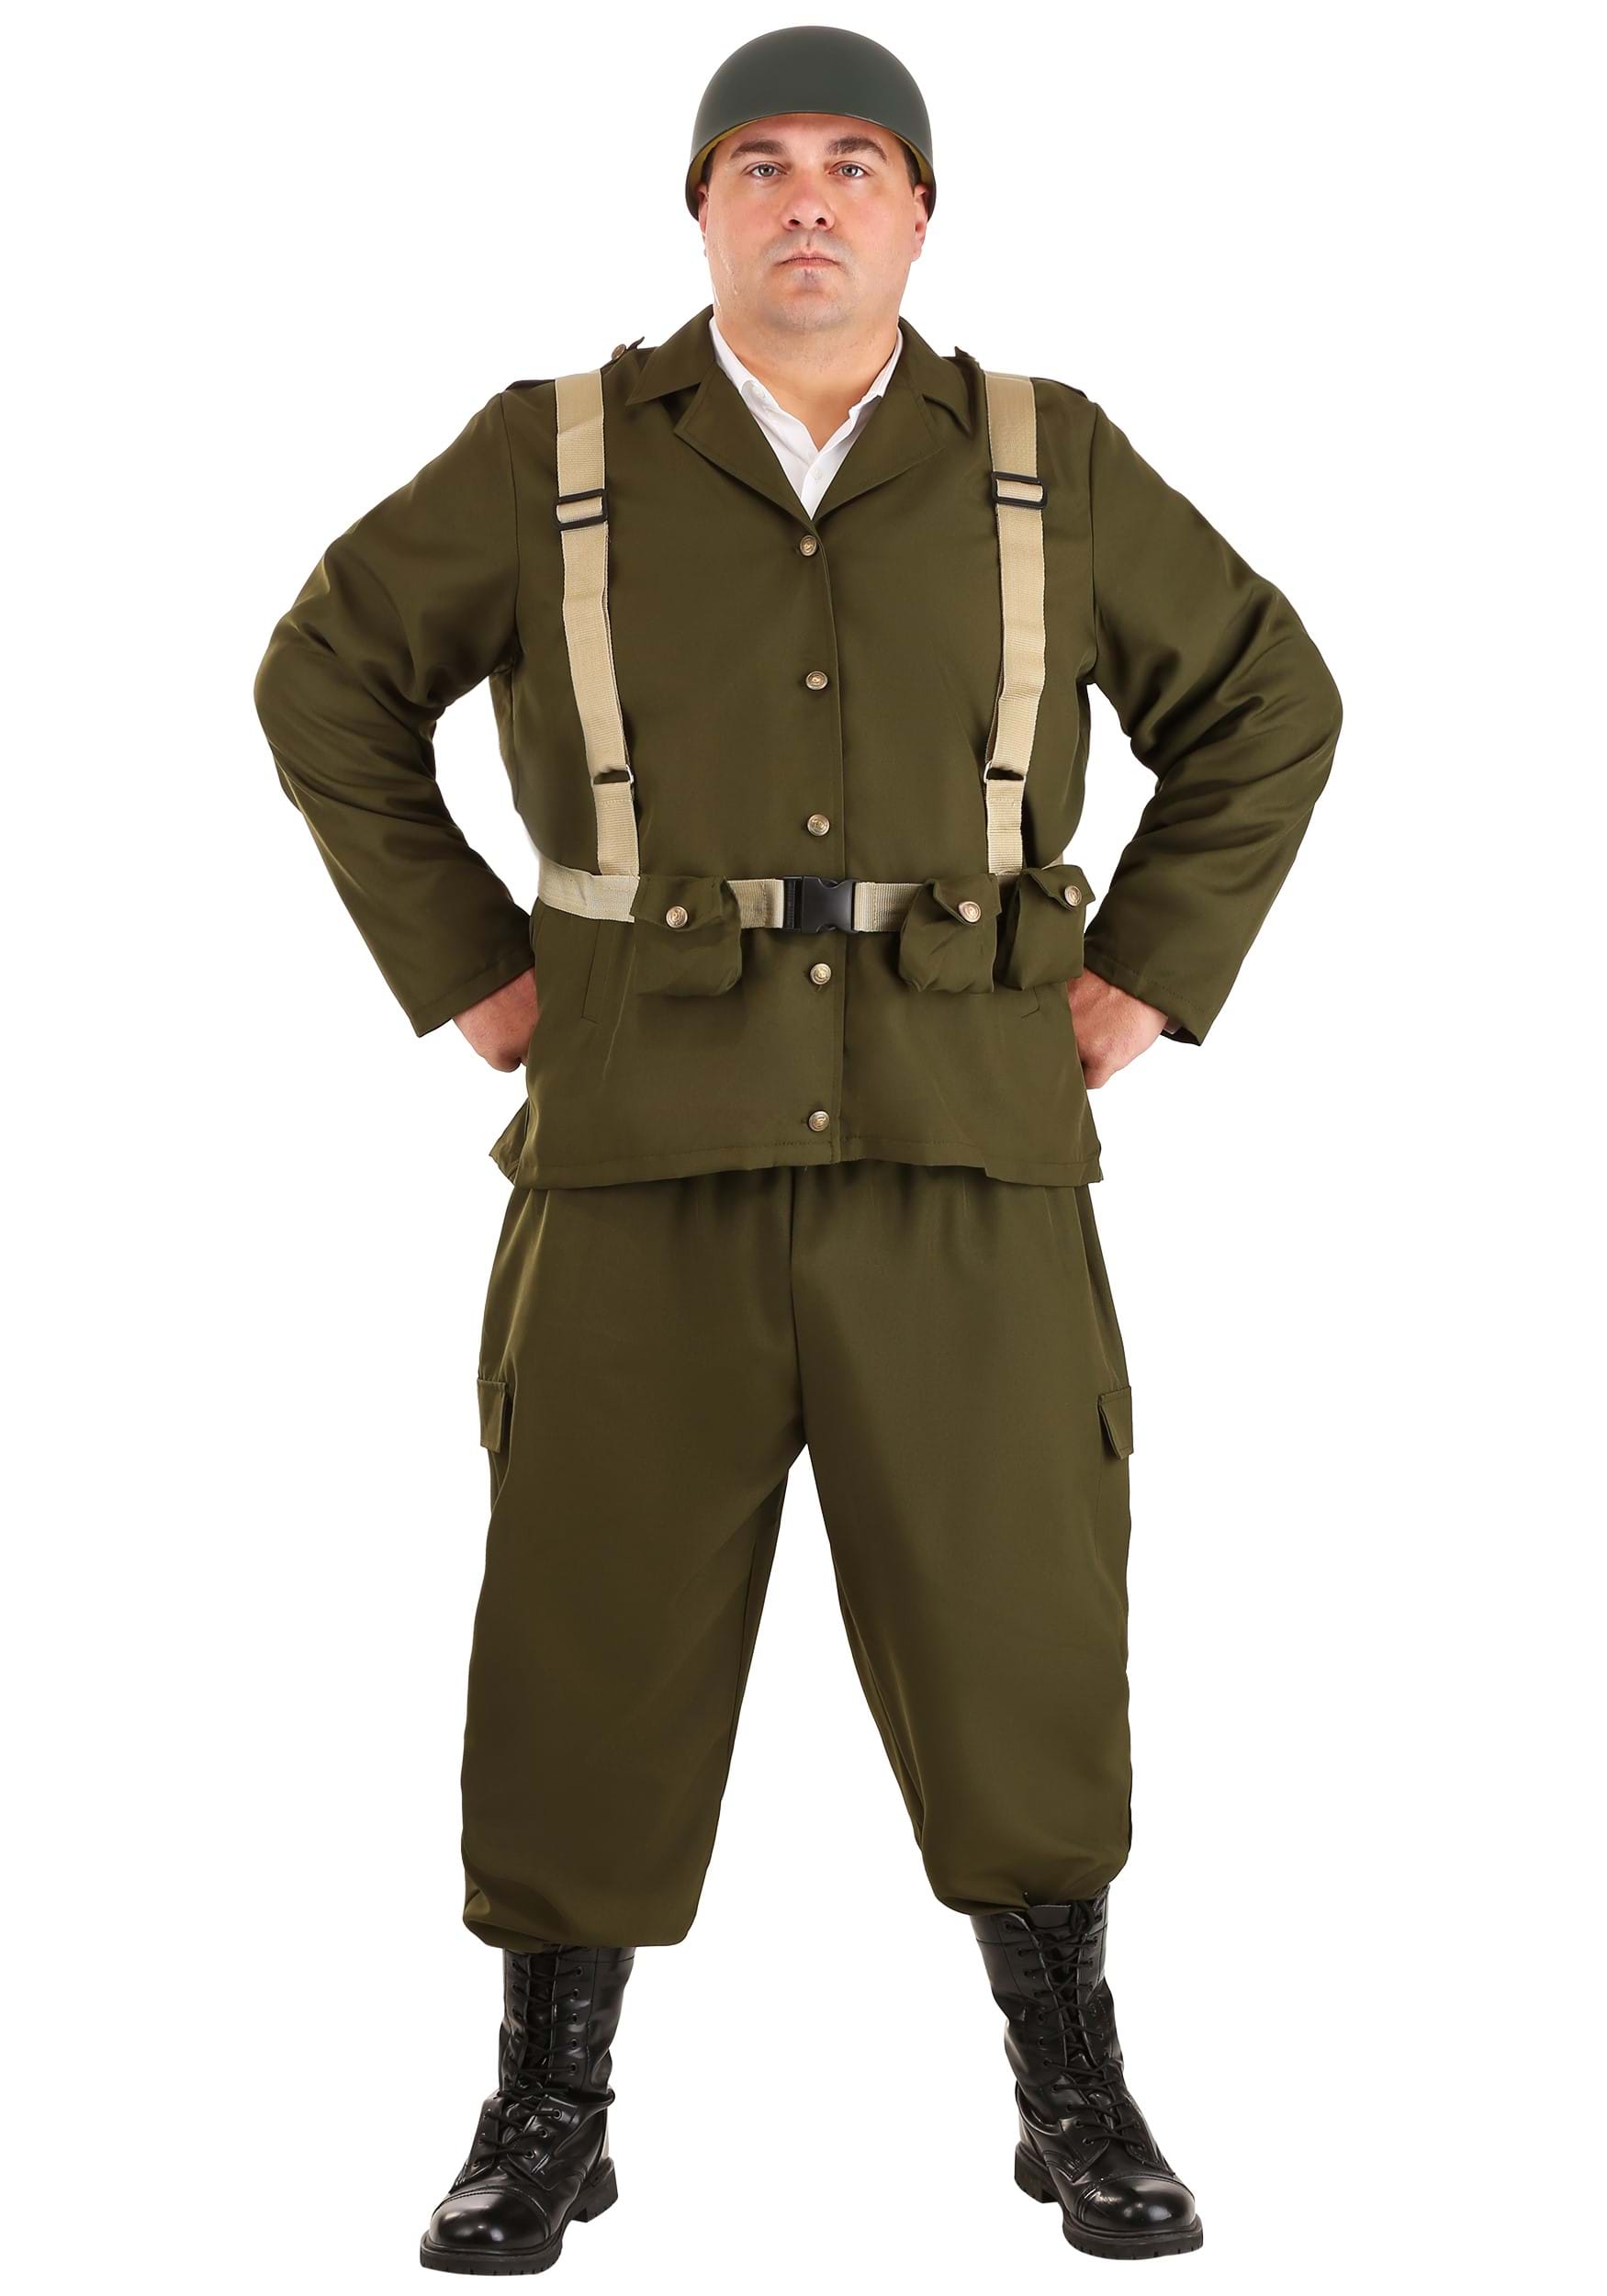 Photos - Fancy Dress Deluxe FUN Costumes  Plus Size WW2 Soldier  Costume for Men Brow 